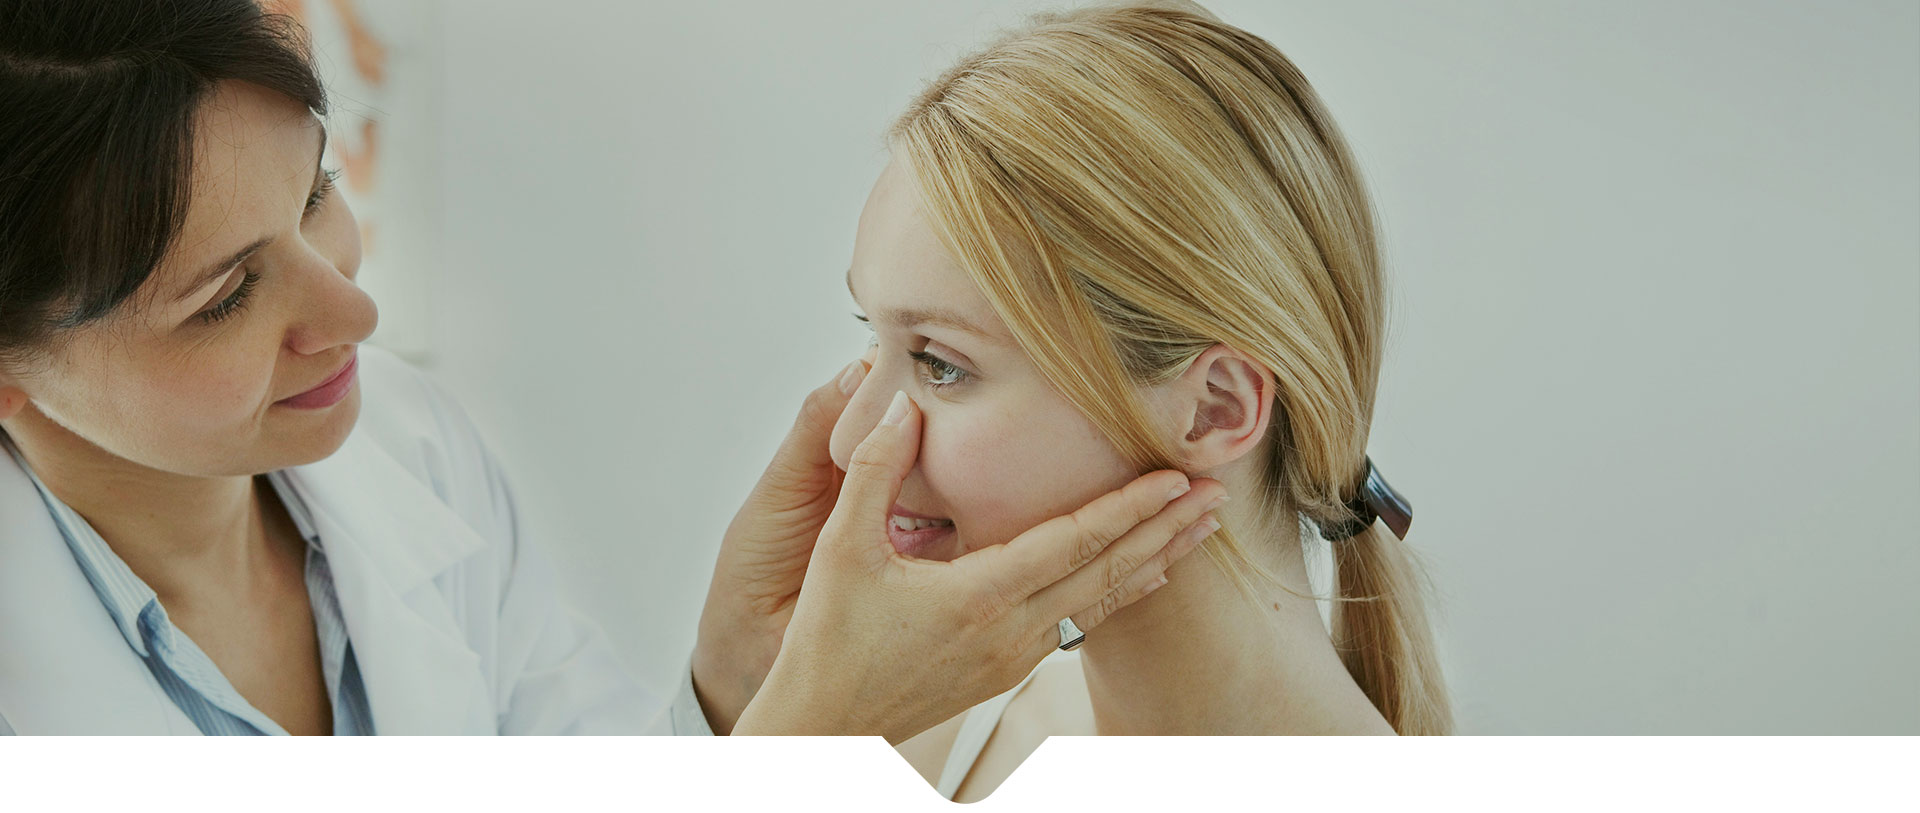 A doctor examining a female patient's nose